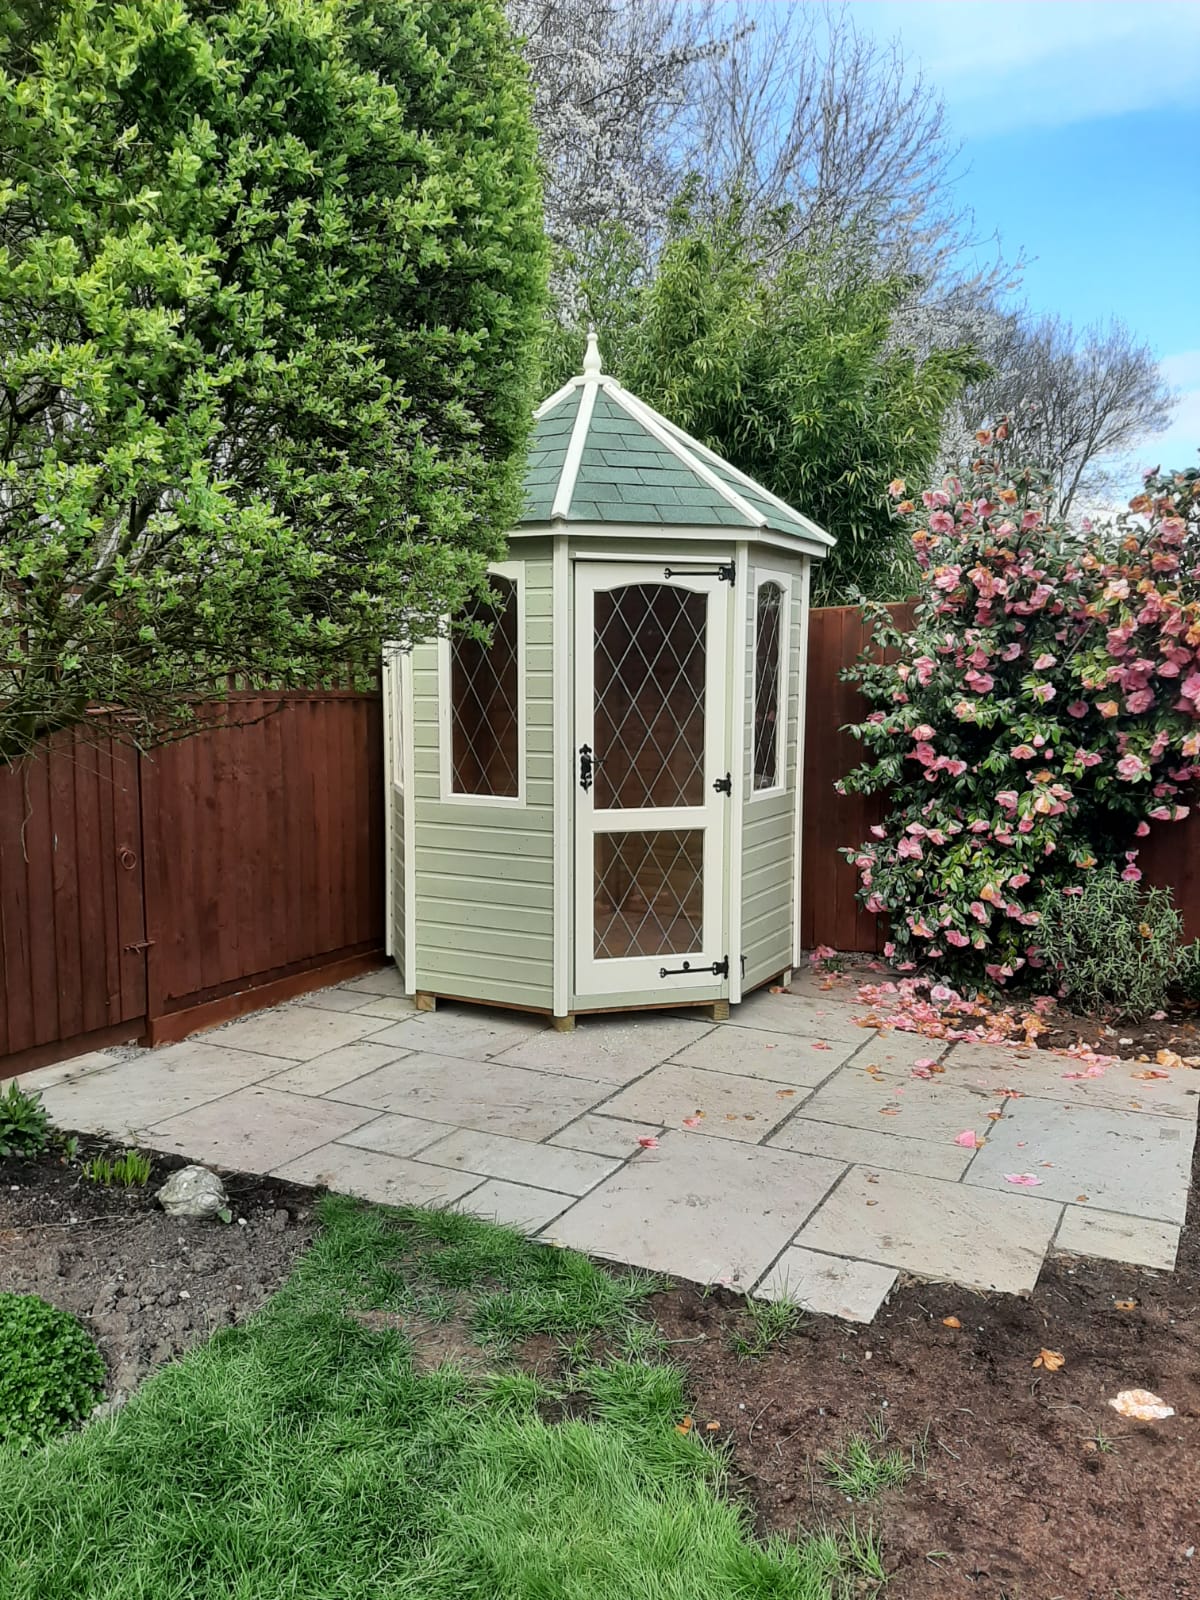 Bromley Octagonal Summerhouse with leaded windows